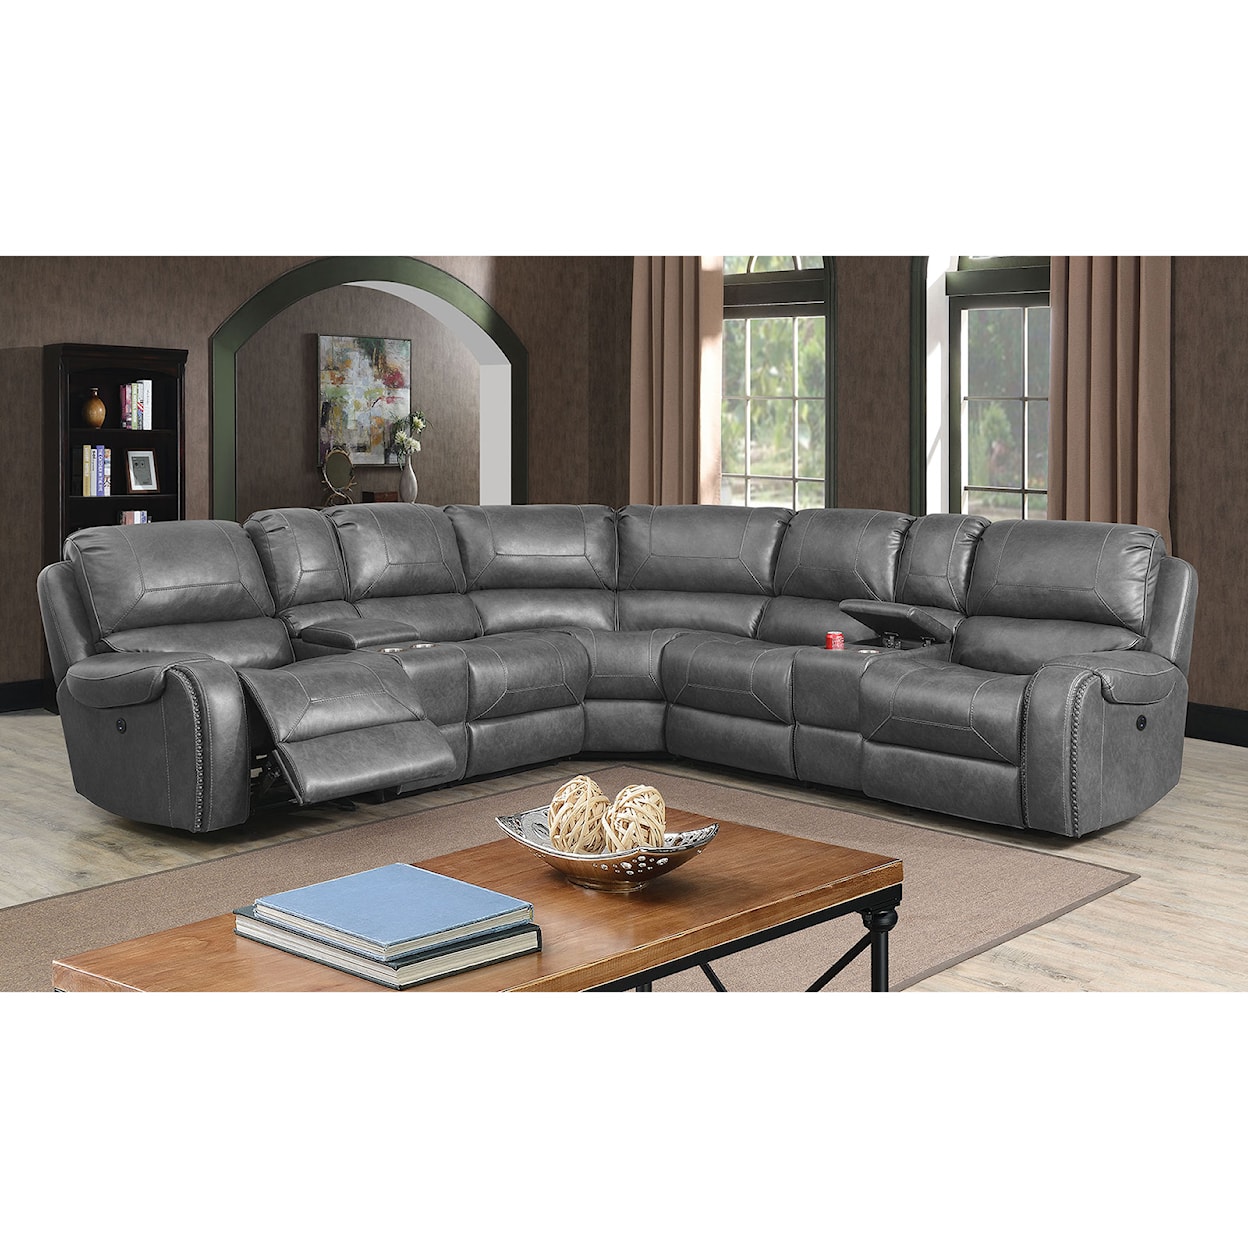 Furniture of America Joanne Power Sectional